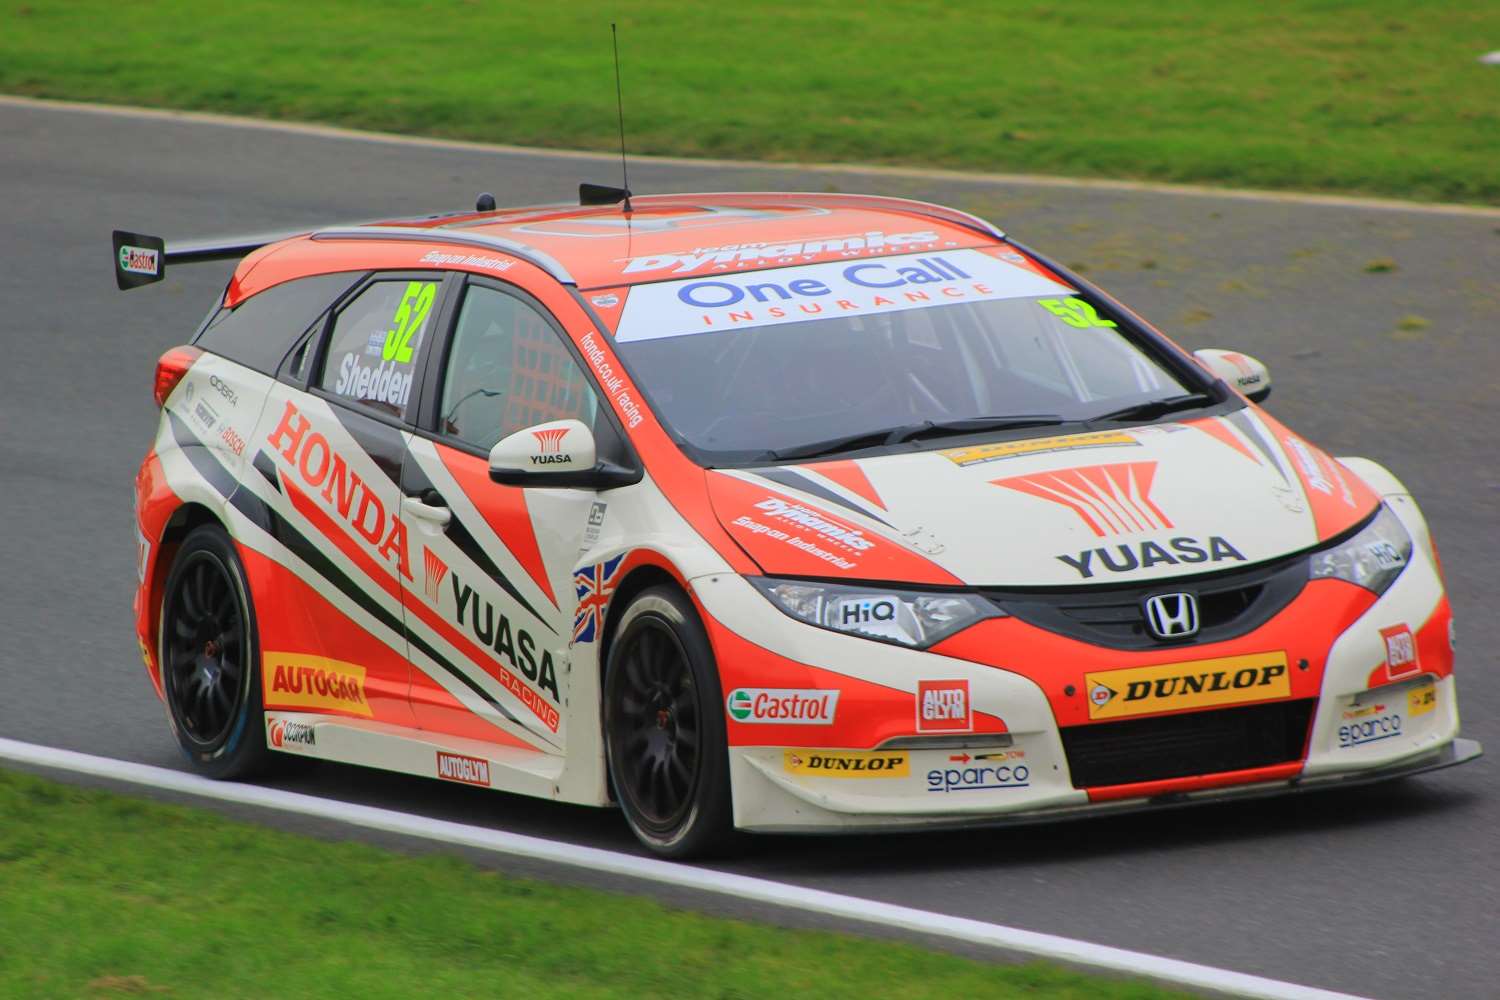 The Civic Tourer enjoyed a successful debut. Picture - Joe Wright